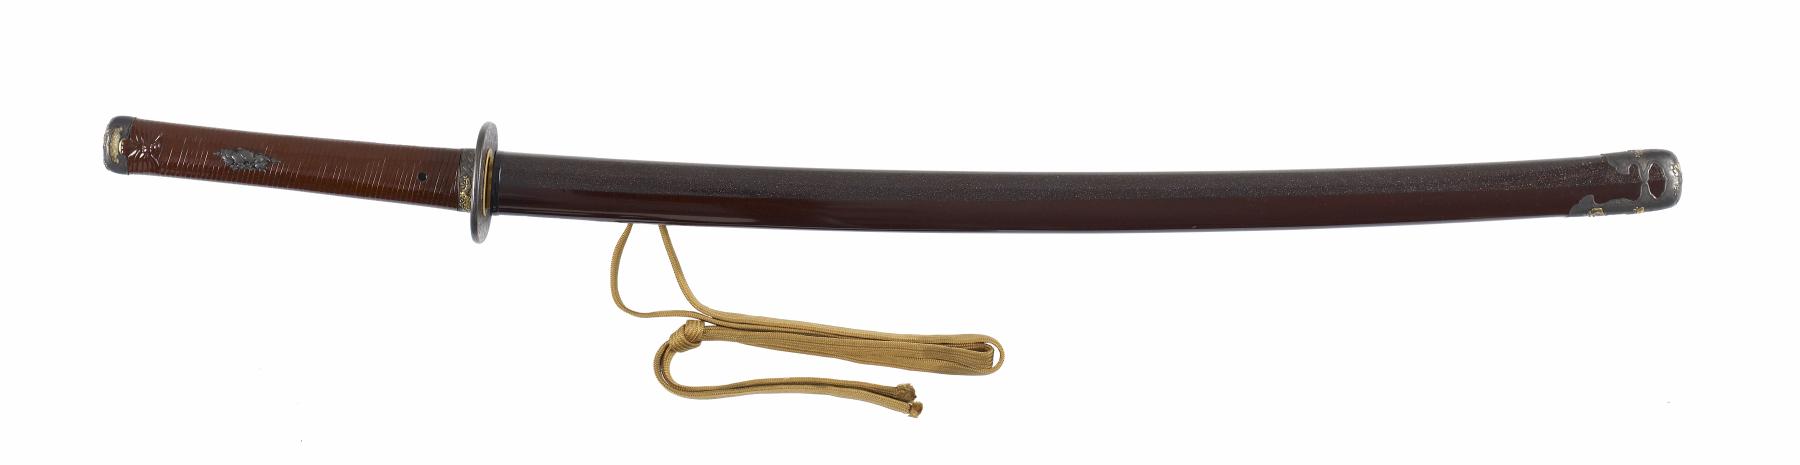 Image for Katana sword with saya of red-brown lacquer and mother-of-pearl- inlay (includes 51.1209.1-51.1209.4)